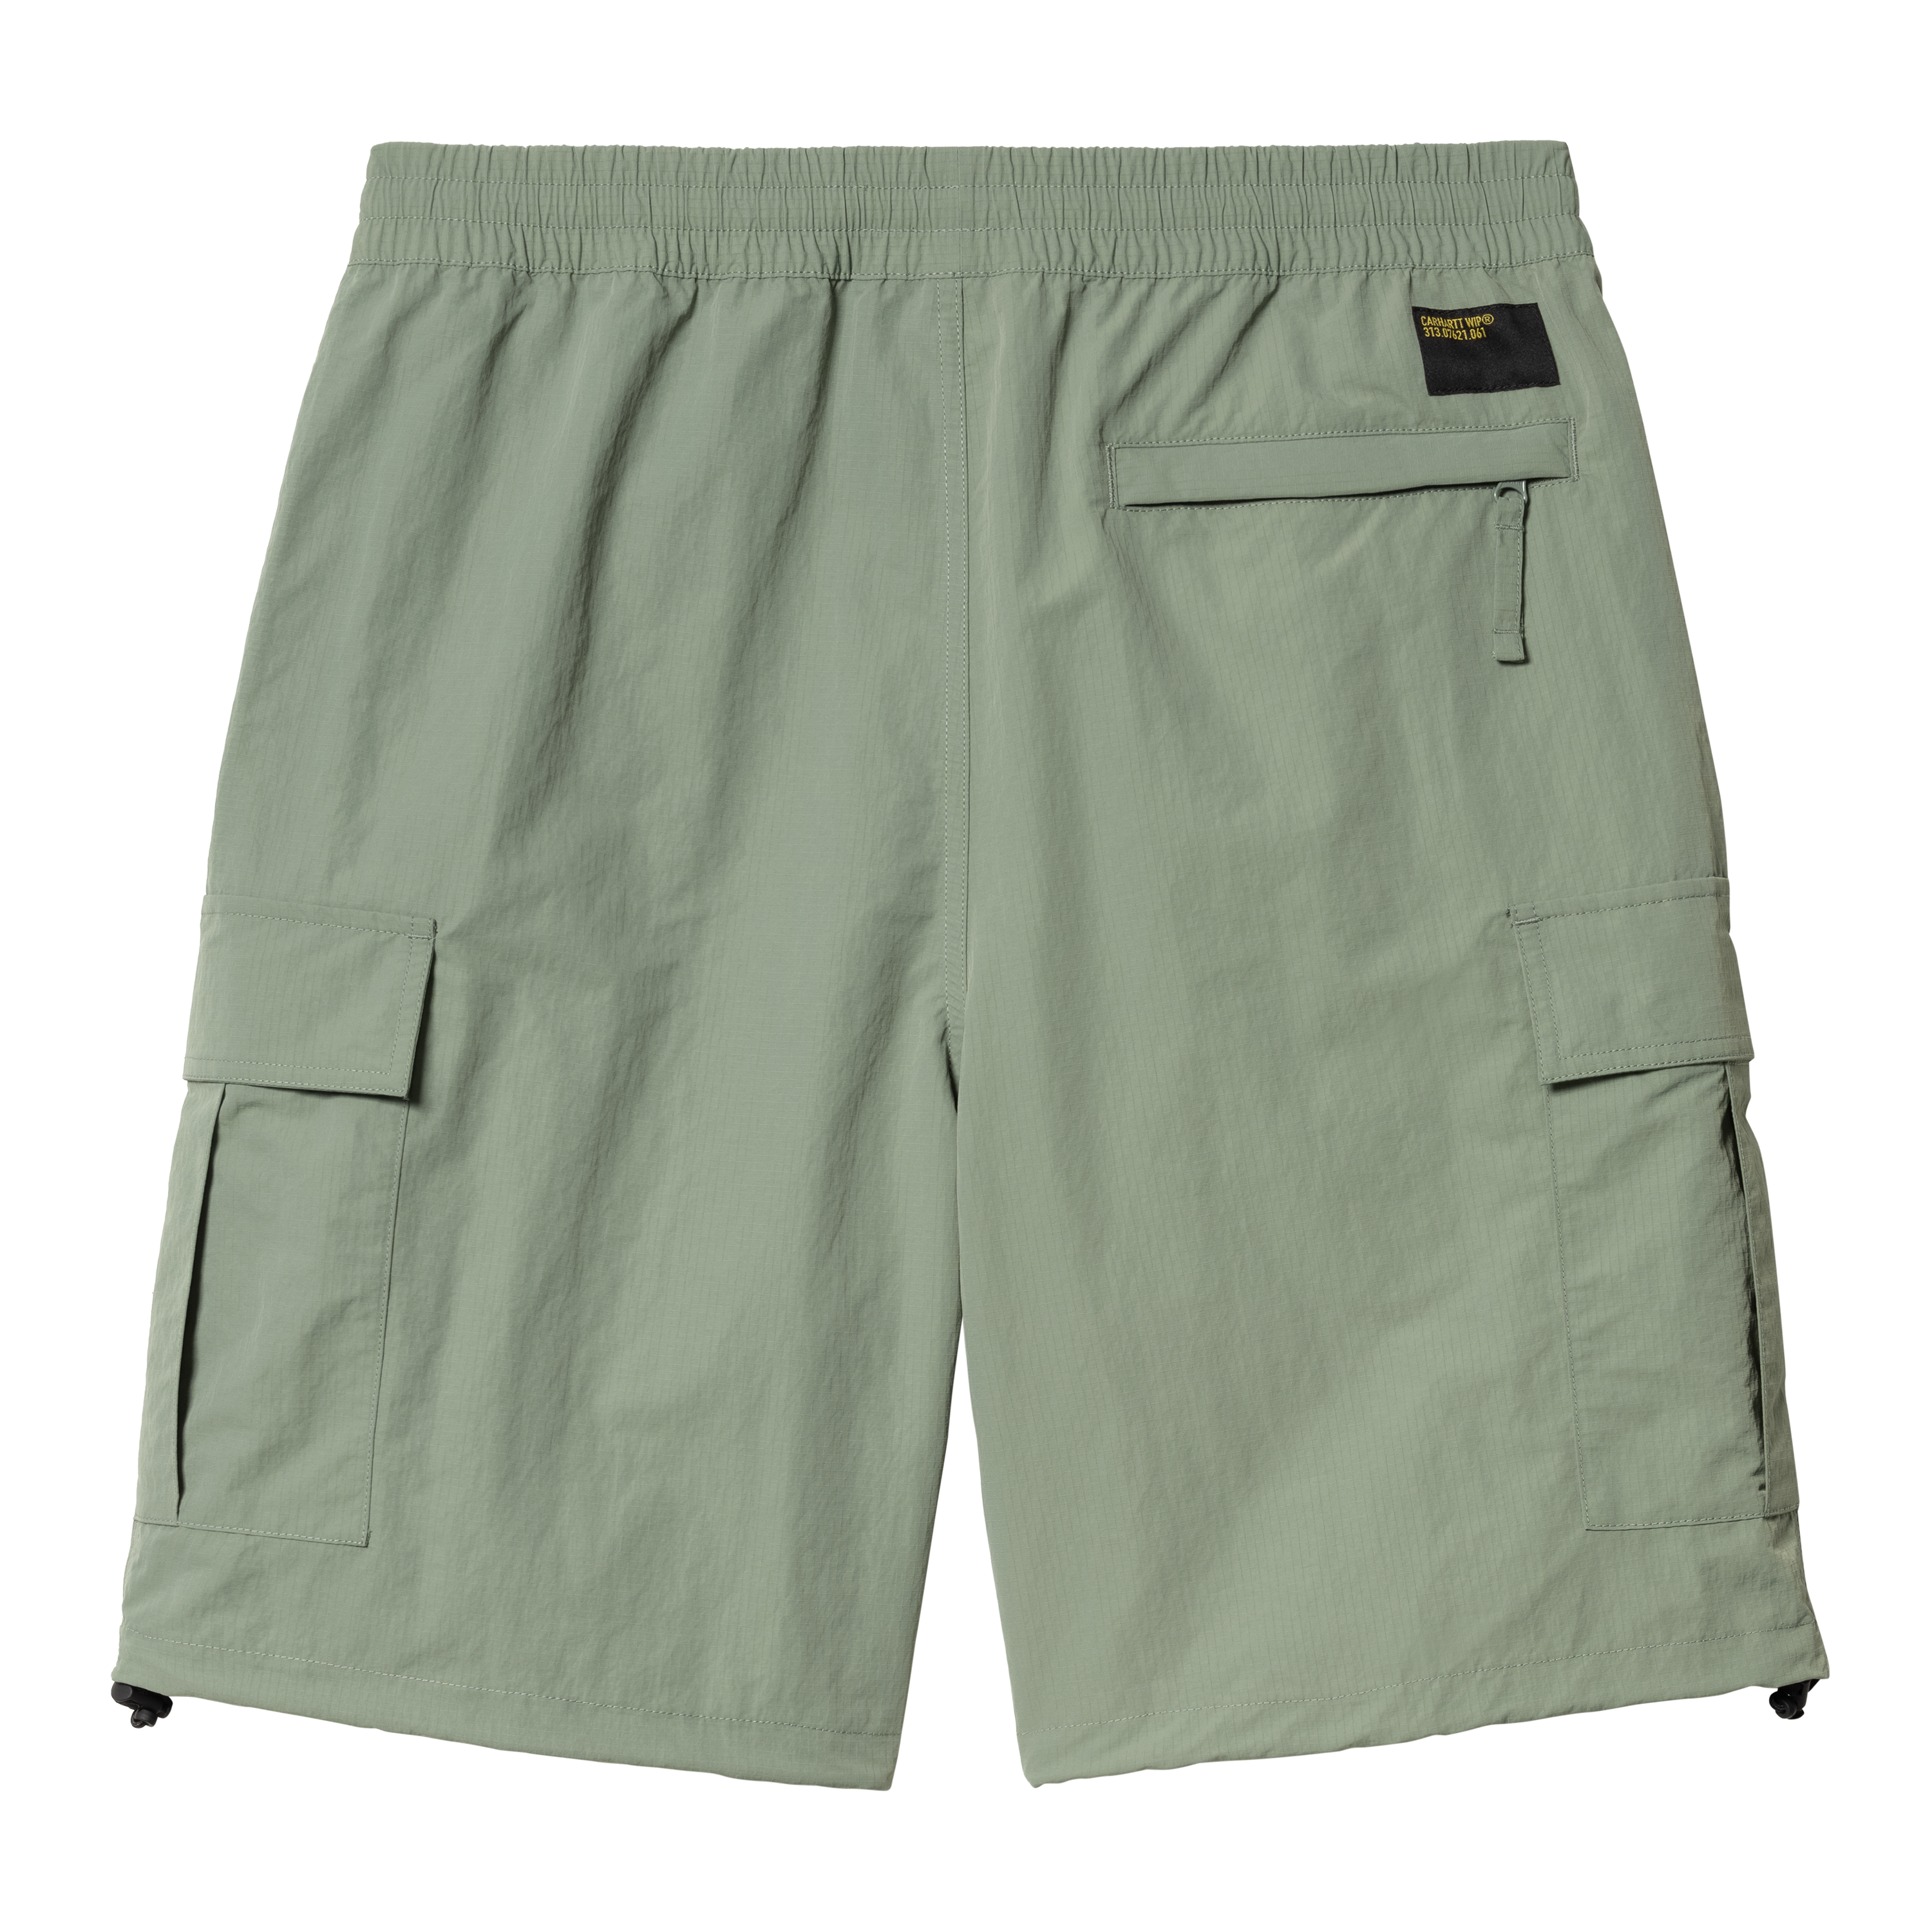 Water repellent stretch cargo short pants